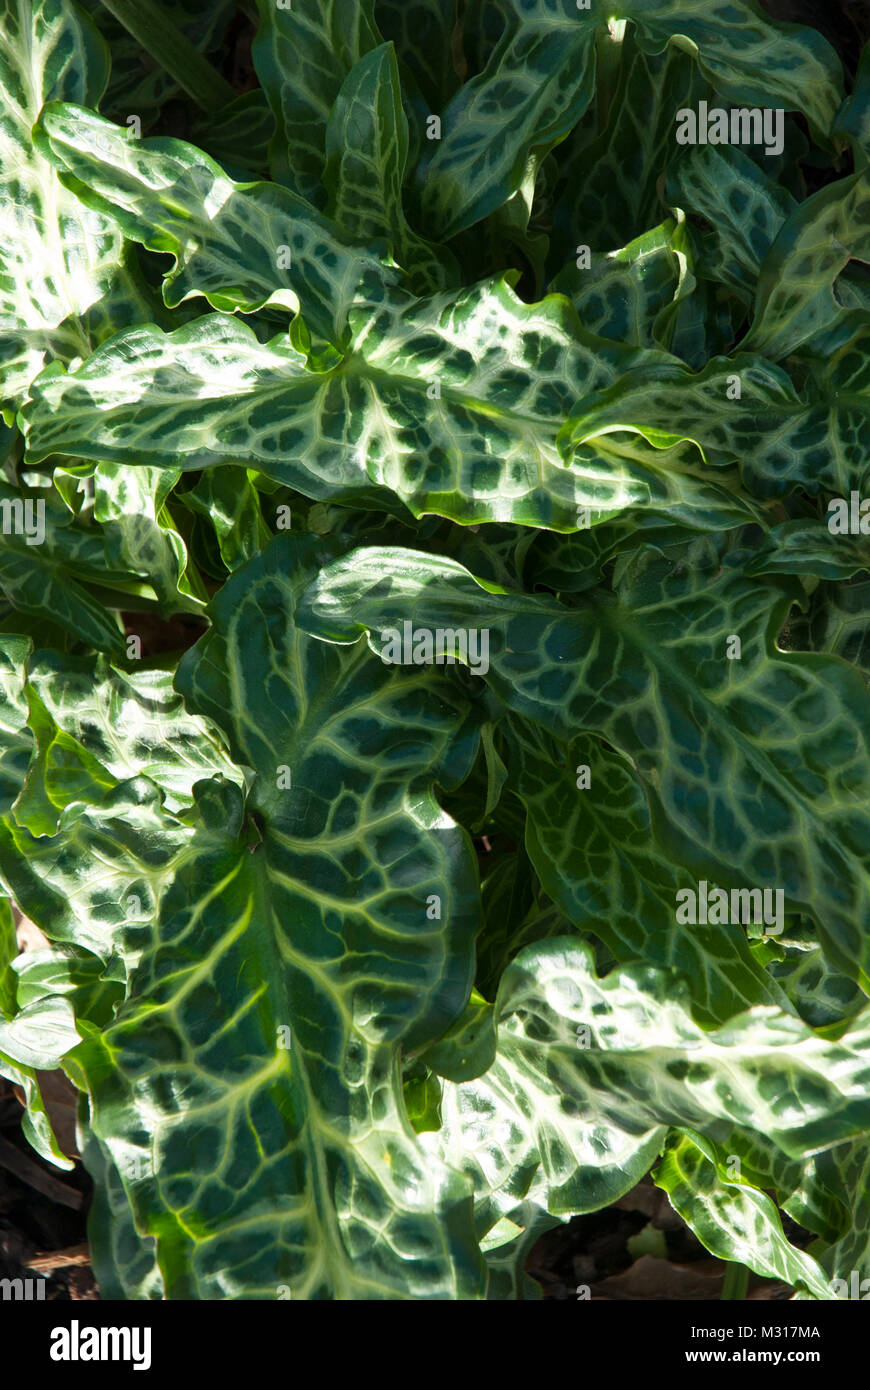 Attractive green foliage with white marbleing and veins. Leaves of the Italian arum 'arum italicum', marmoratum', ground cover in shade/ woodland. Stock Photo